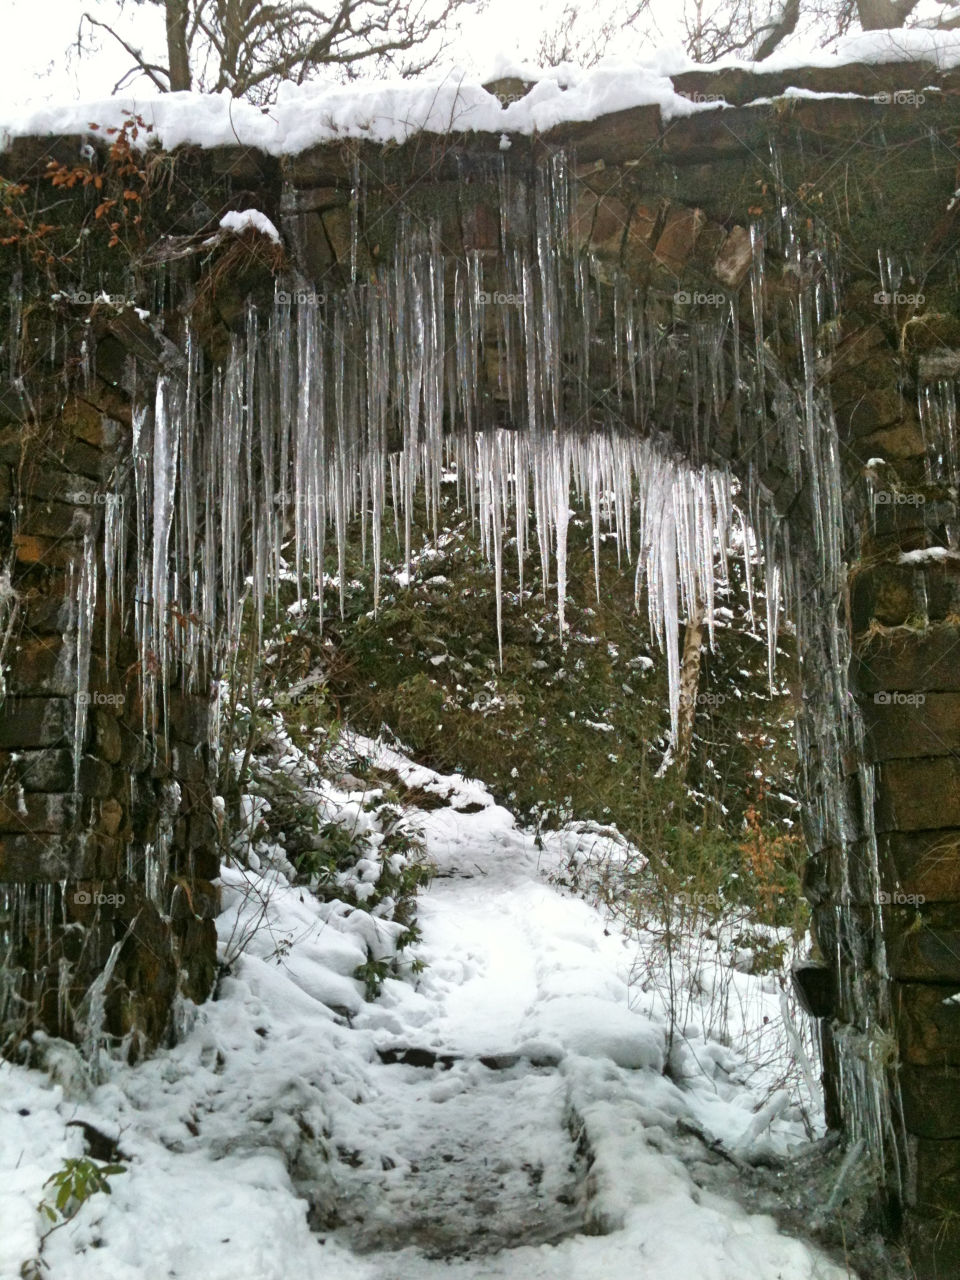 Icicle spectacular